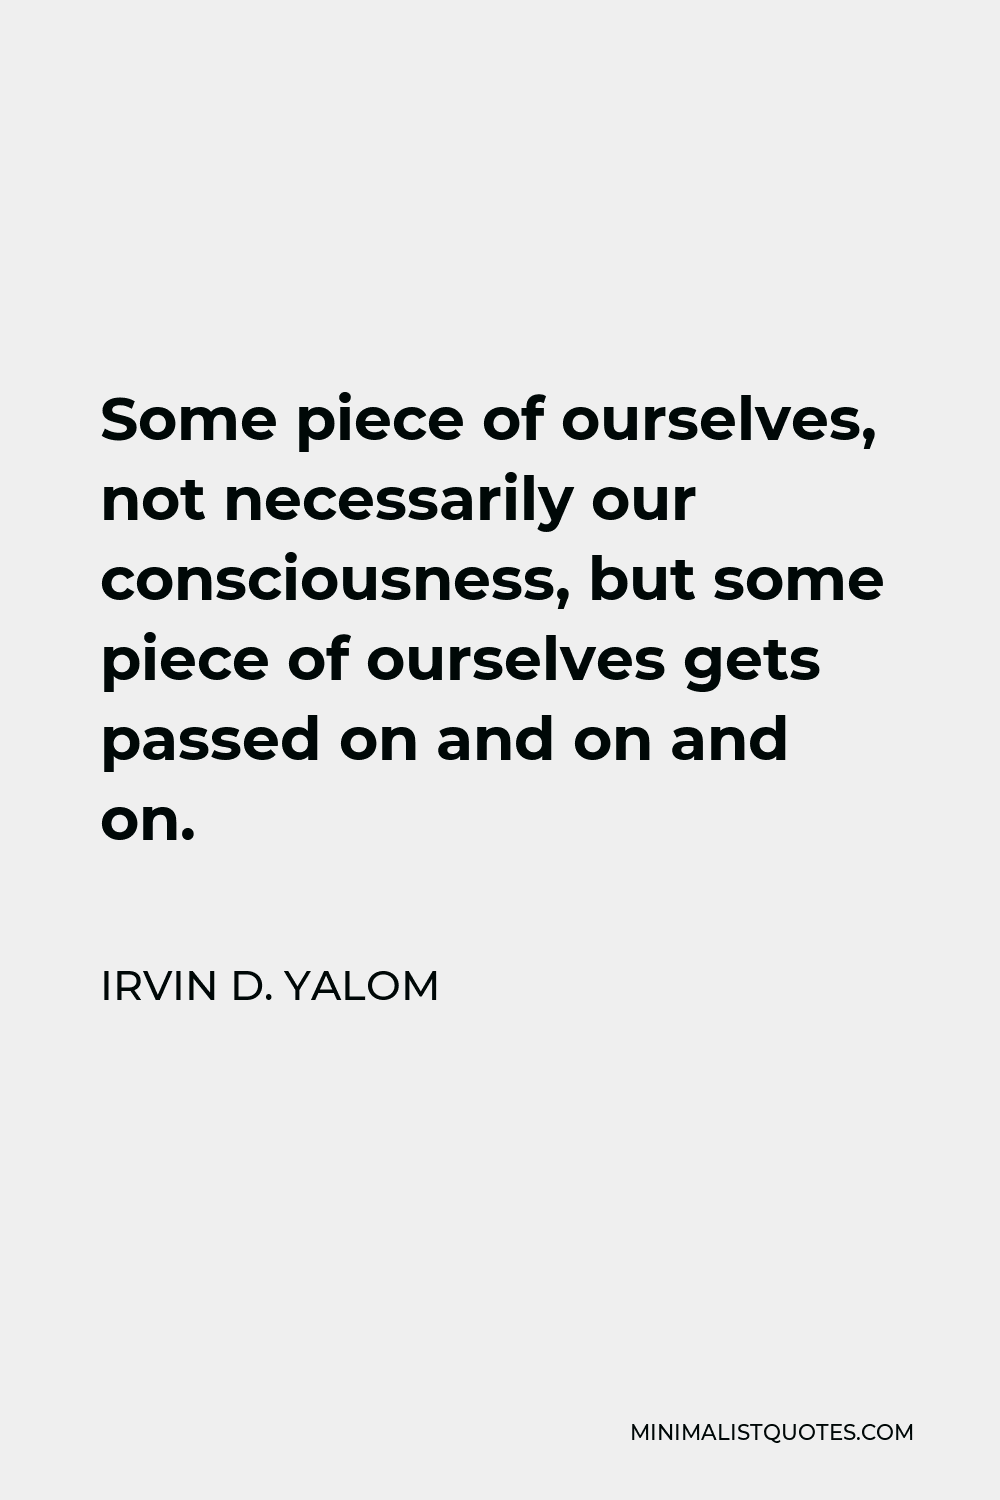 Irvin D. Yalom Quote - Some piece of ourselves, not necessarily our consciousness, but some piece of ourselves gets passed on and on and on.